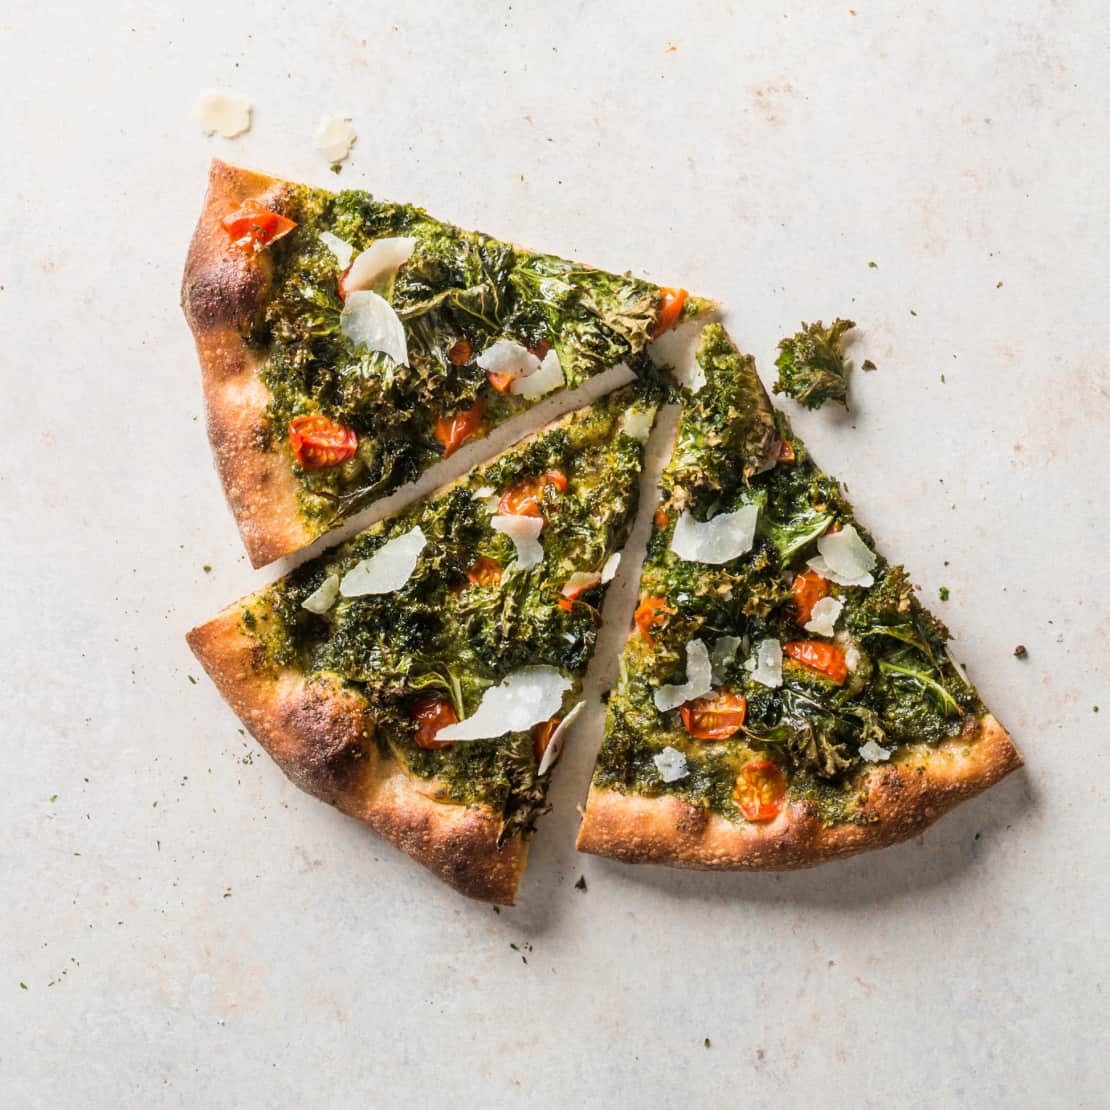 Whole-Wheat Pizza with Kale and Sunflower Seed Pesto